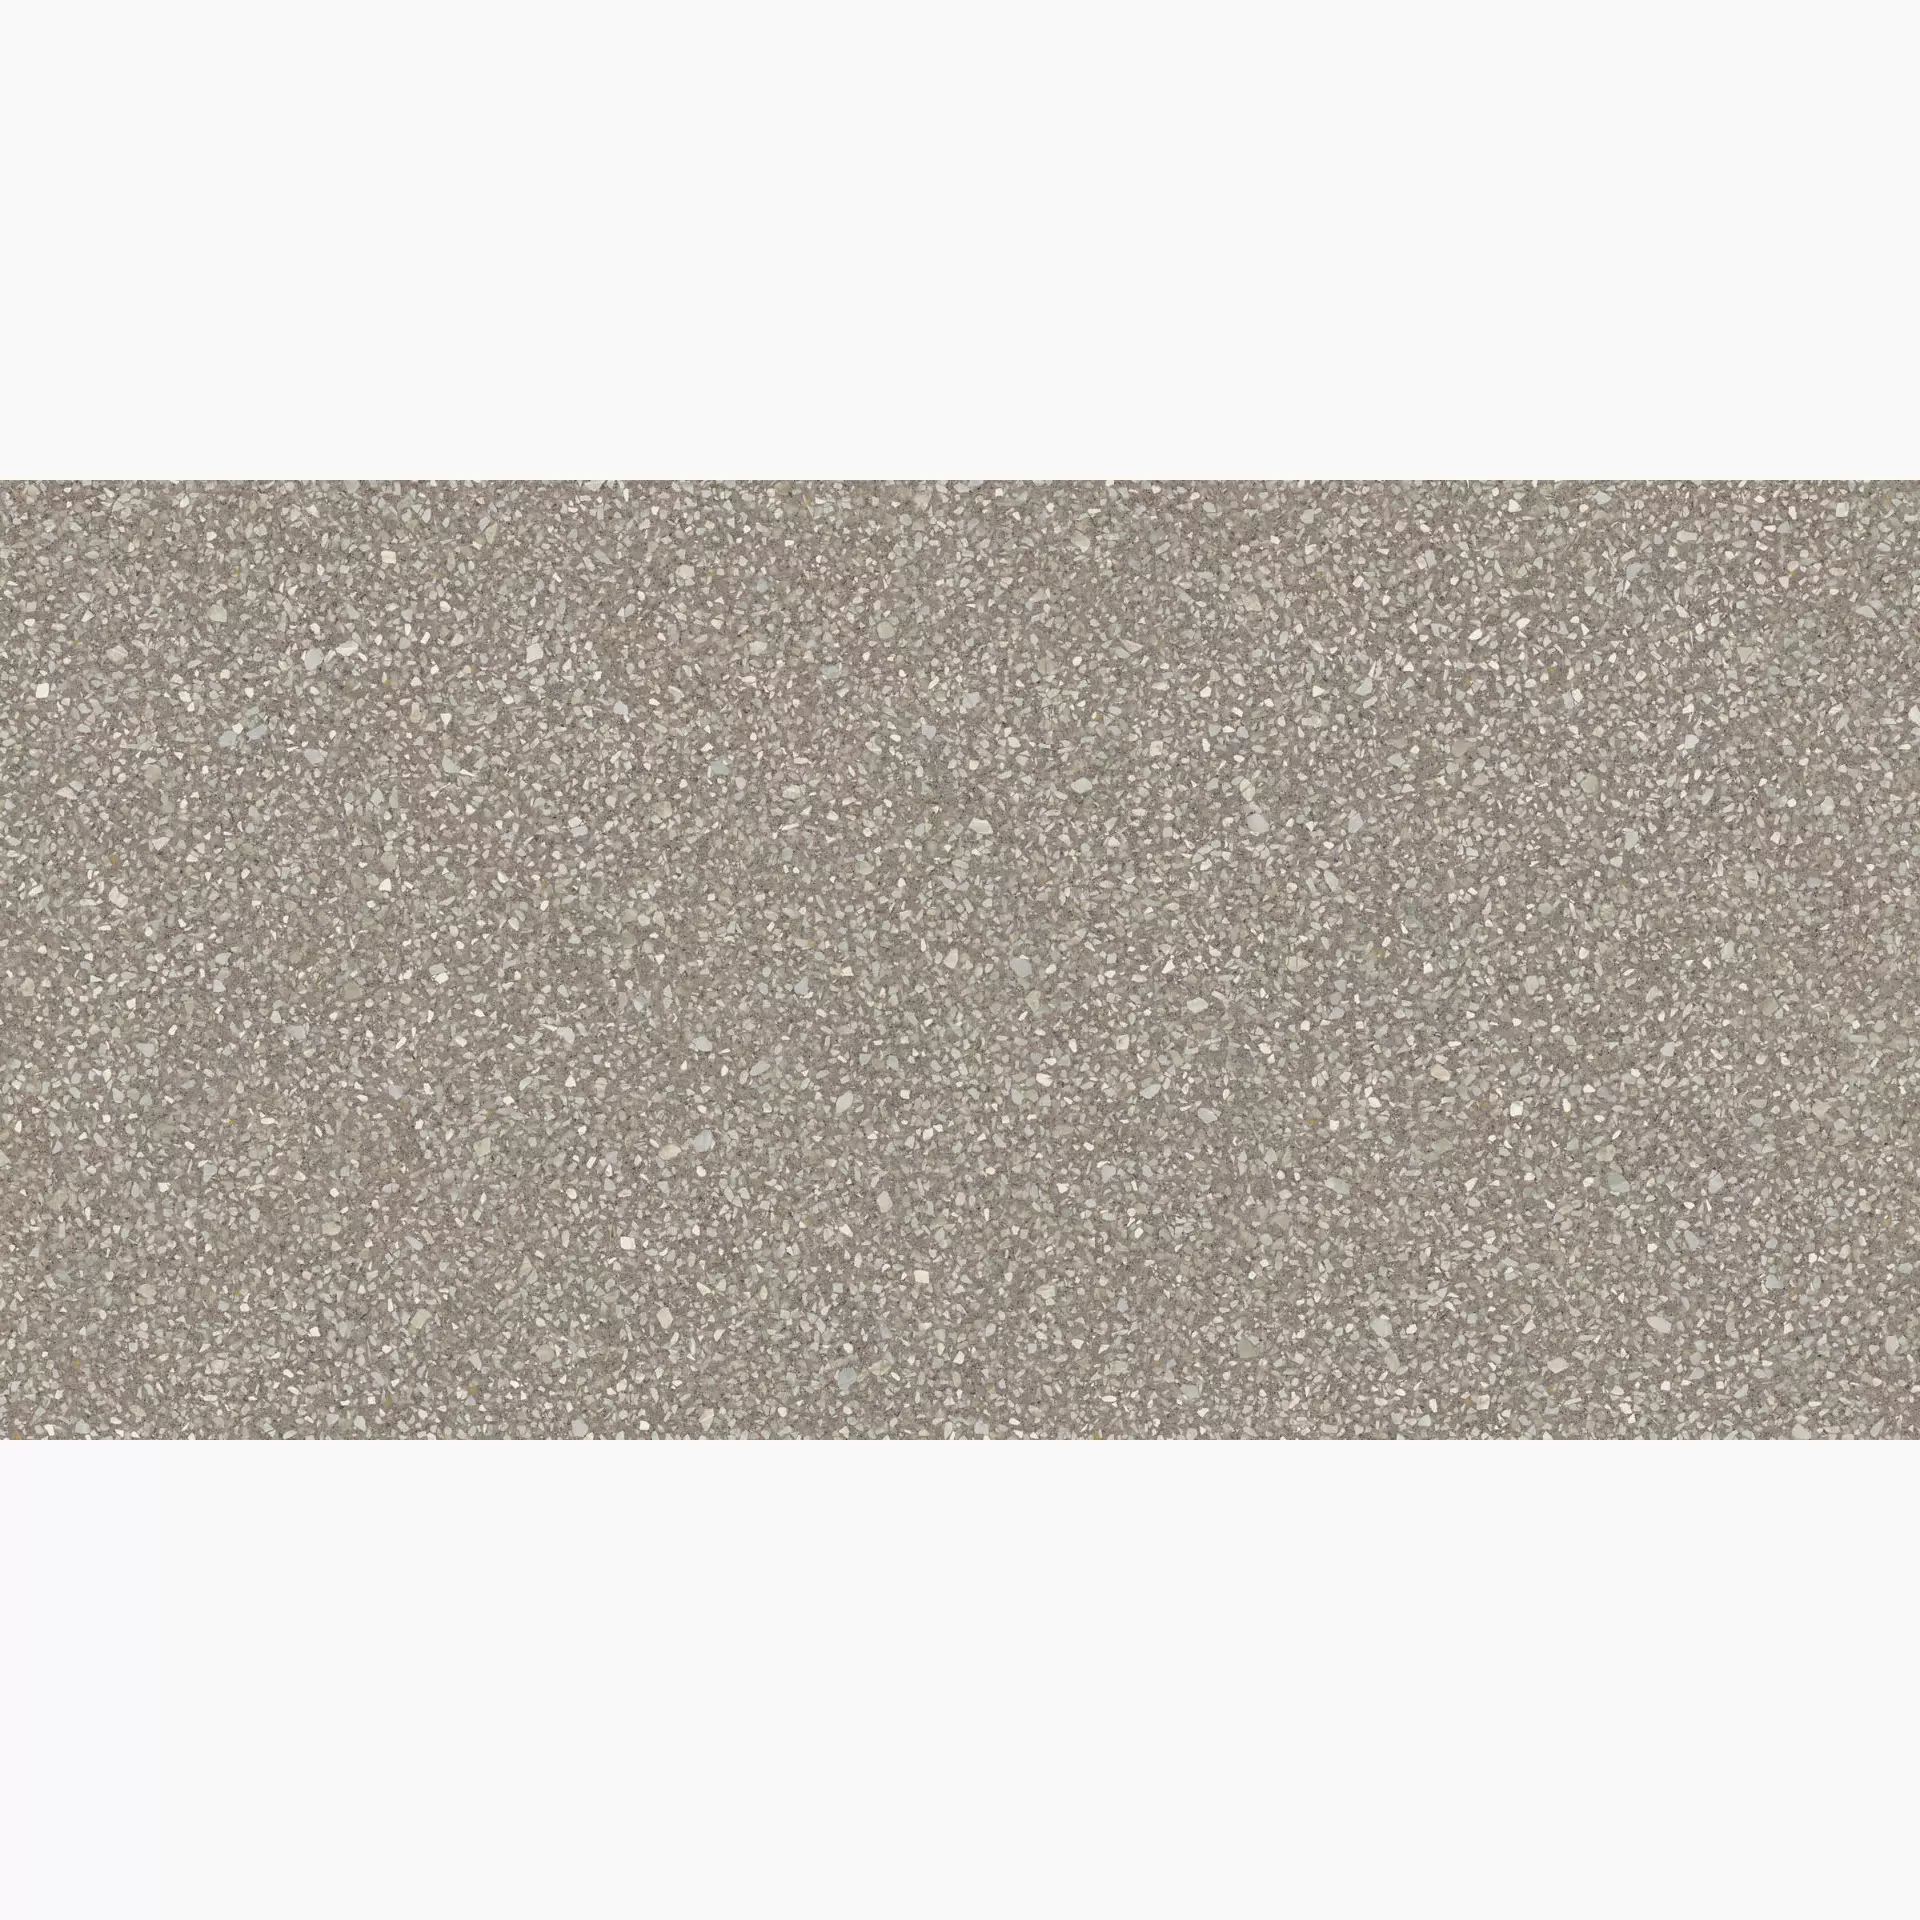 ABK Blend Dots Taupe Naturale PF60006701 60x120cm rectified 8,5mm